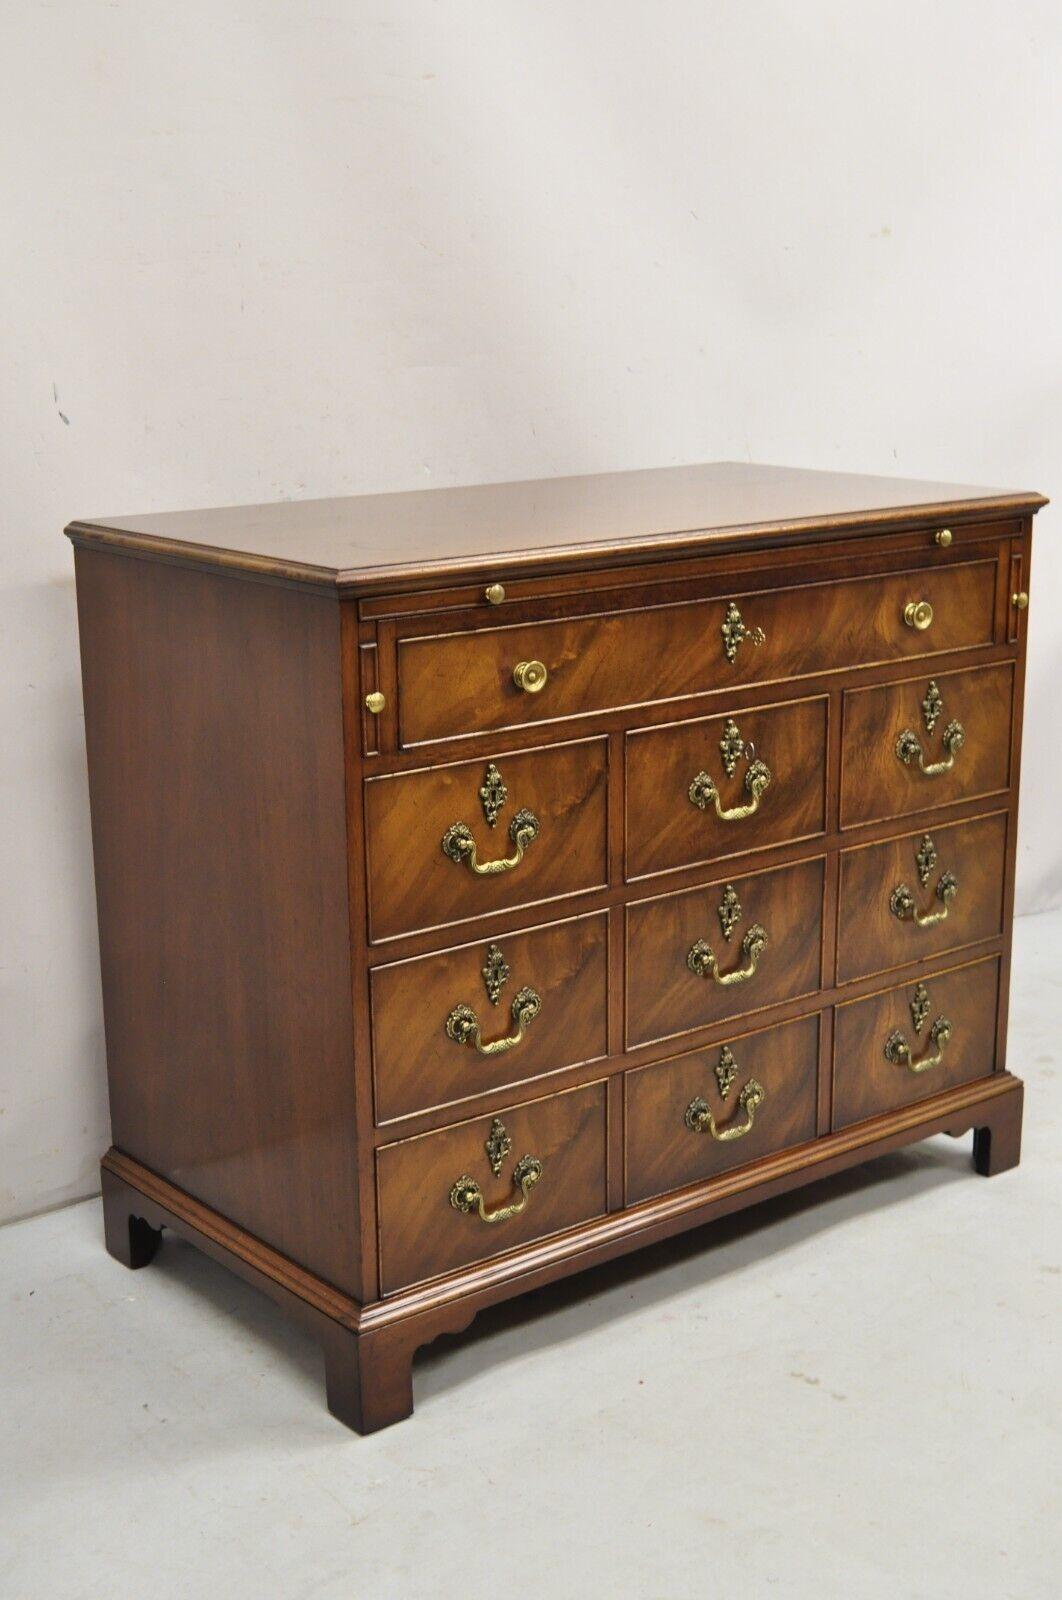 Beacon Hill Georgian Style Mahogany Commode Bachelor Chest of Drawers Server. Item features  6 drawers, pull out surface, working locks and key, solid brass hardware, original label. Circa Early 20th Century. Measurements: 31.5